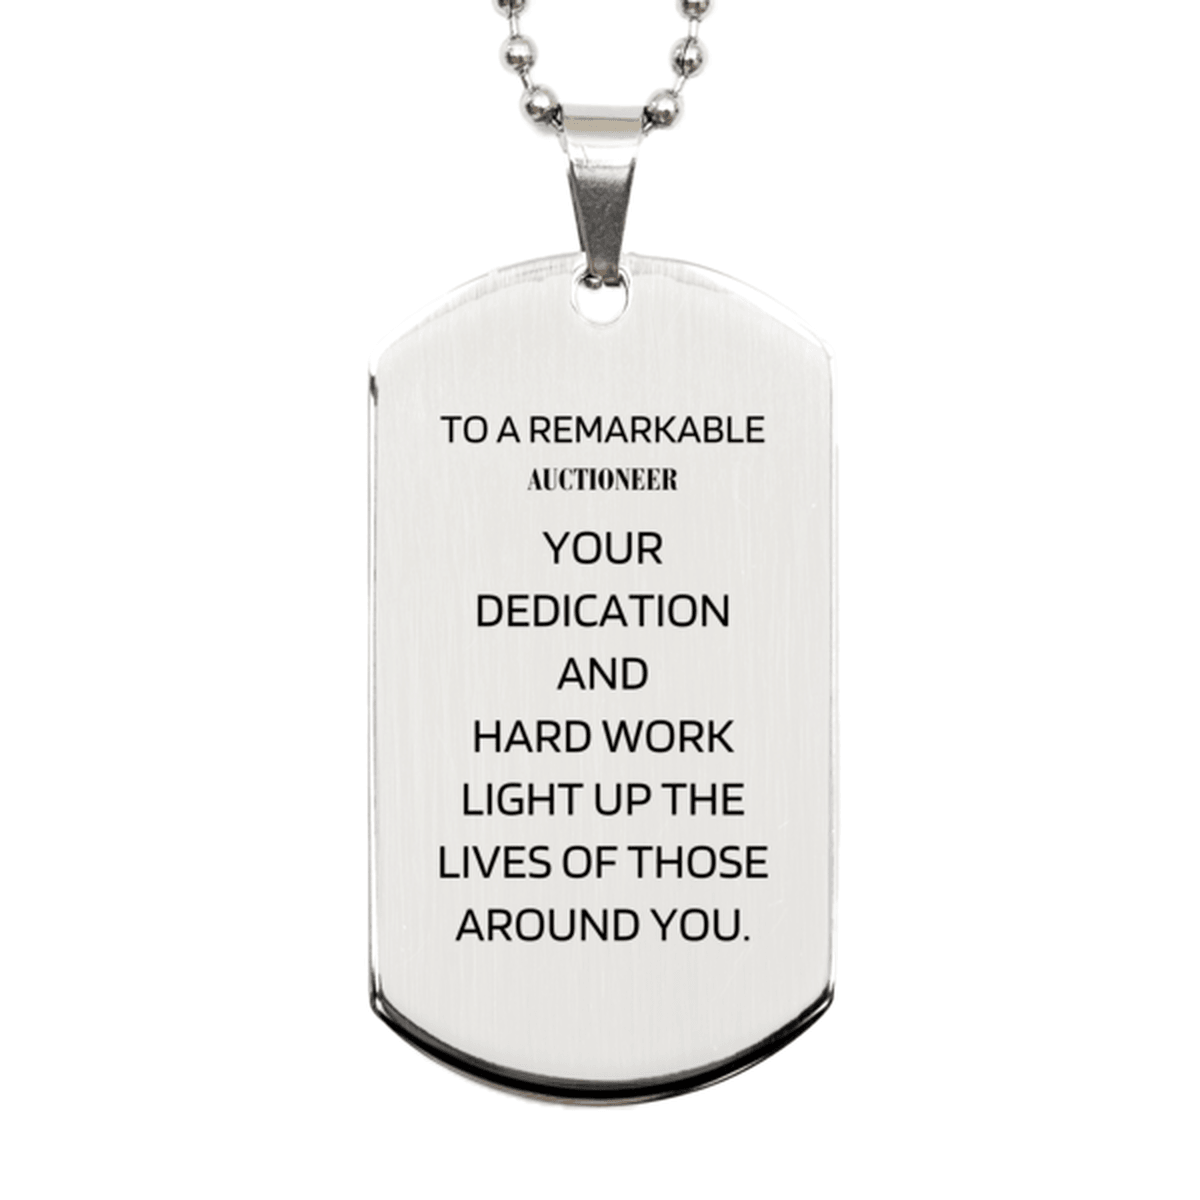 Remarkable Auctioneer Gifts, Your dedication and hard work, Inspirational Birthday Christmas Unique Silver Dog Tag For Auctioneer, Coworkers, Men, Women, Friends - Mallard Moon Gift Shop